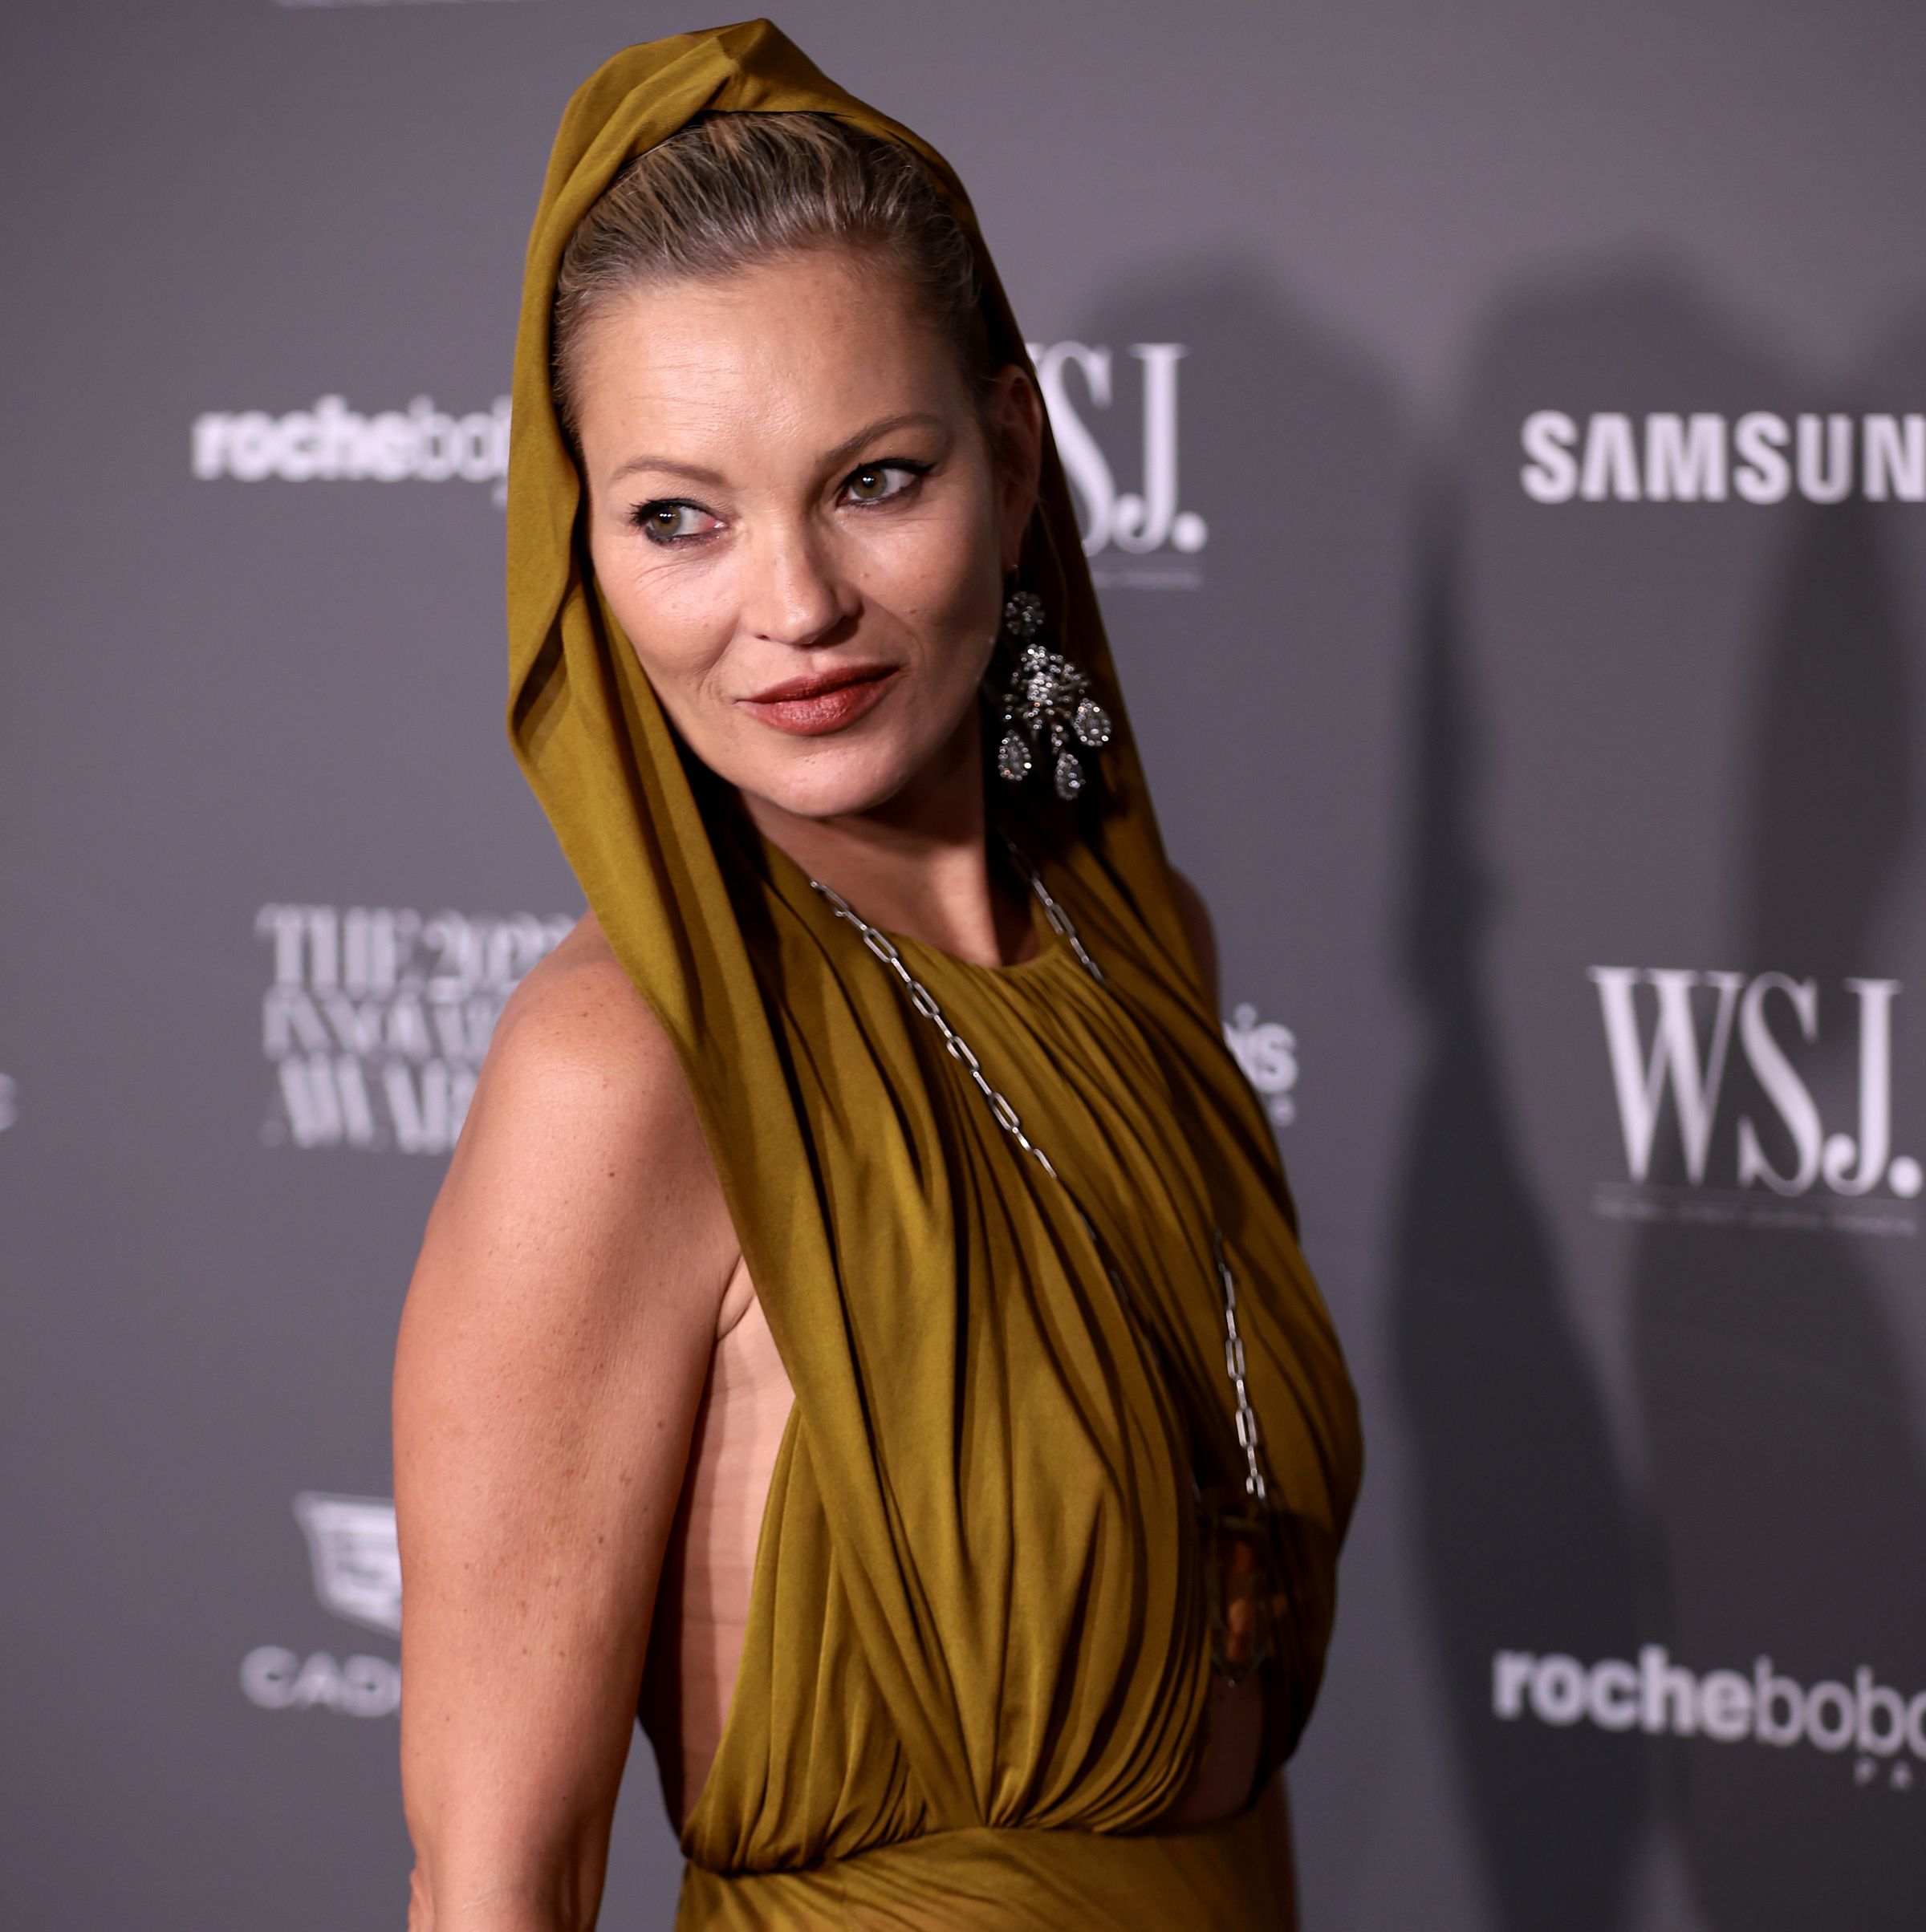 Kate Moss Takes the Naked Dress to New Heights in Sheer Hooded Gown